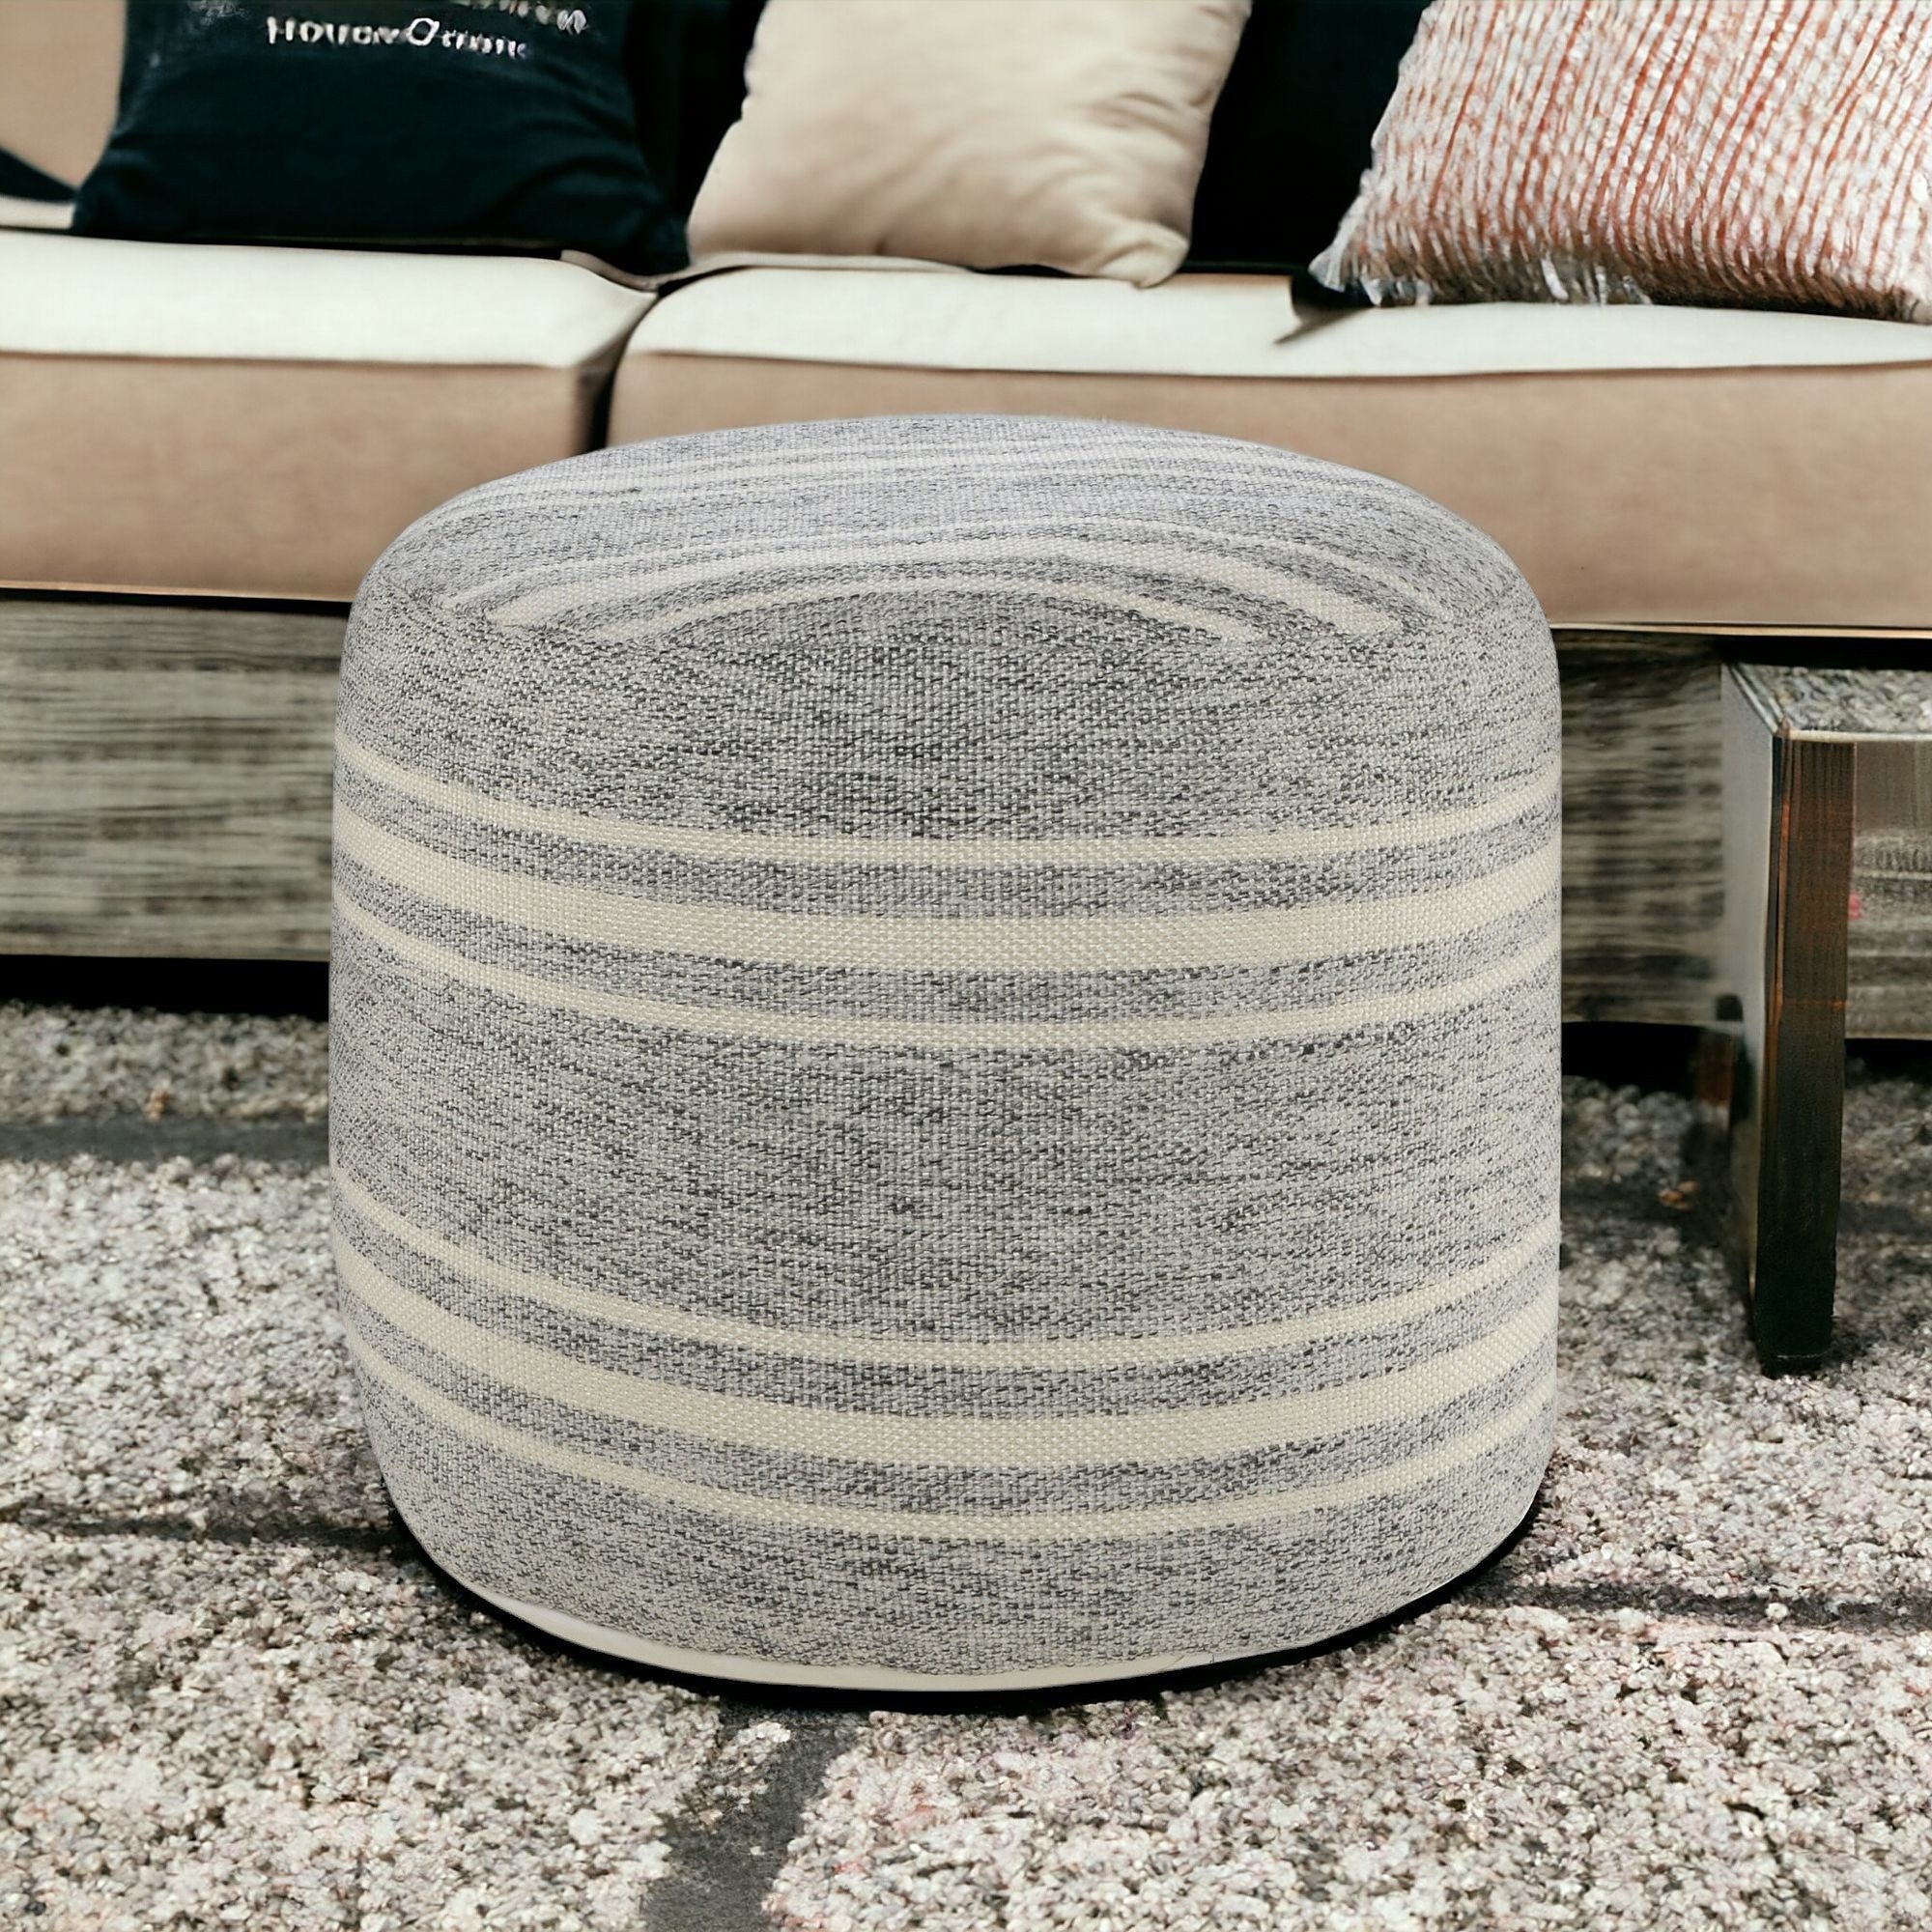 18" Gray Polyester Round Striped Indoor Outdoor Pouf Ottoman